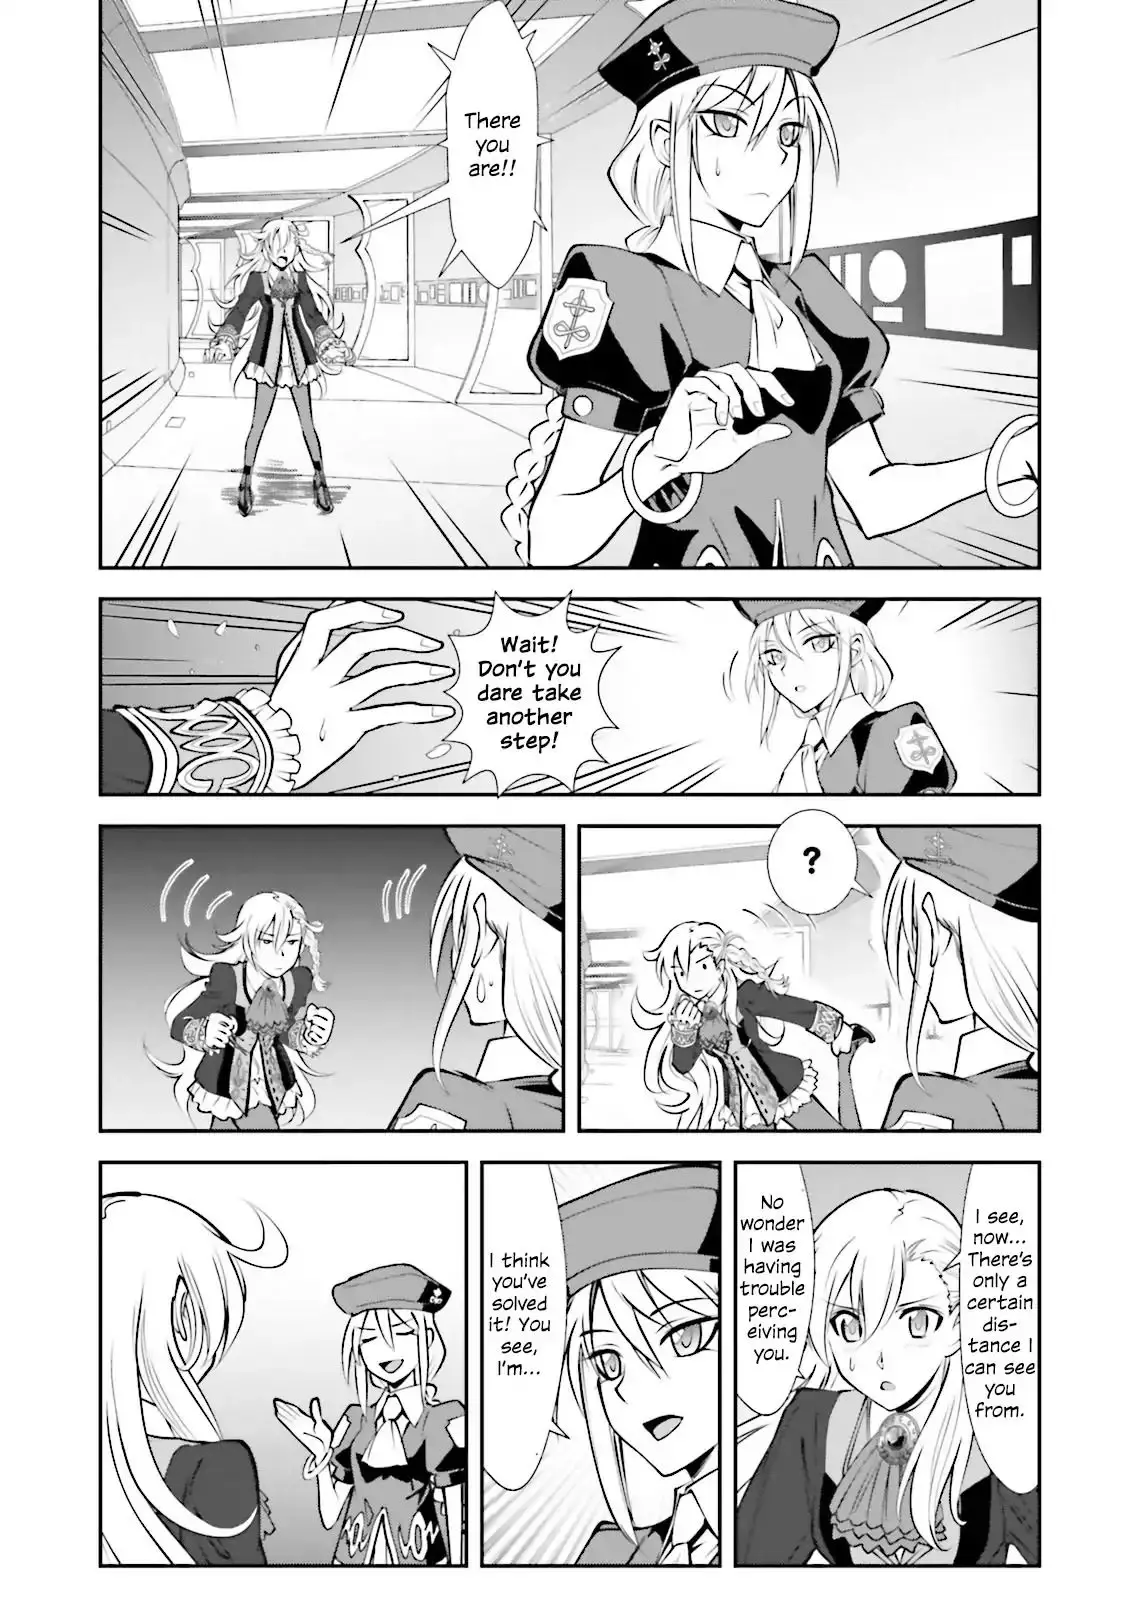 Melty Blood - Back Alley Alliance Nightmare - 5 page 13